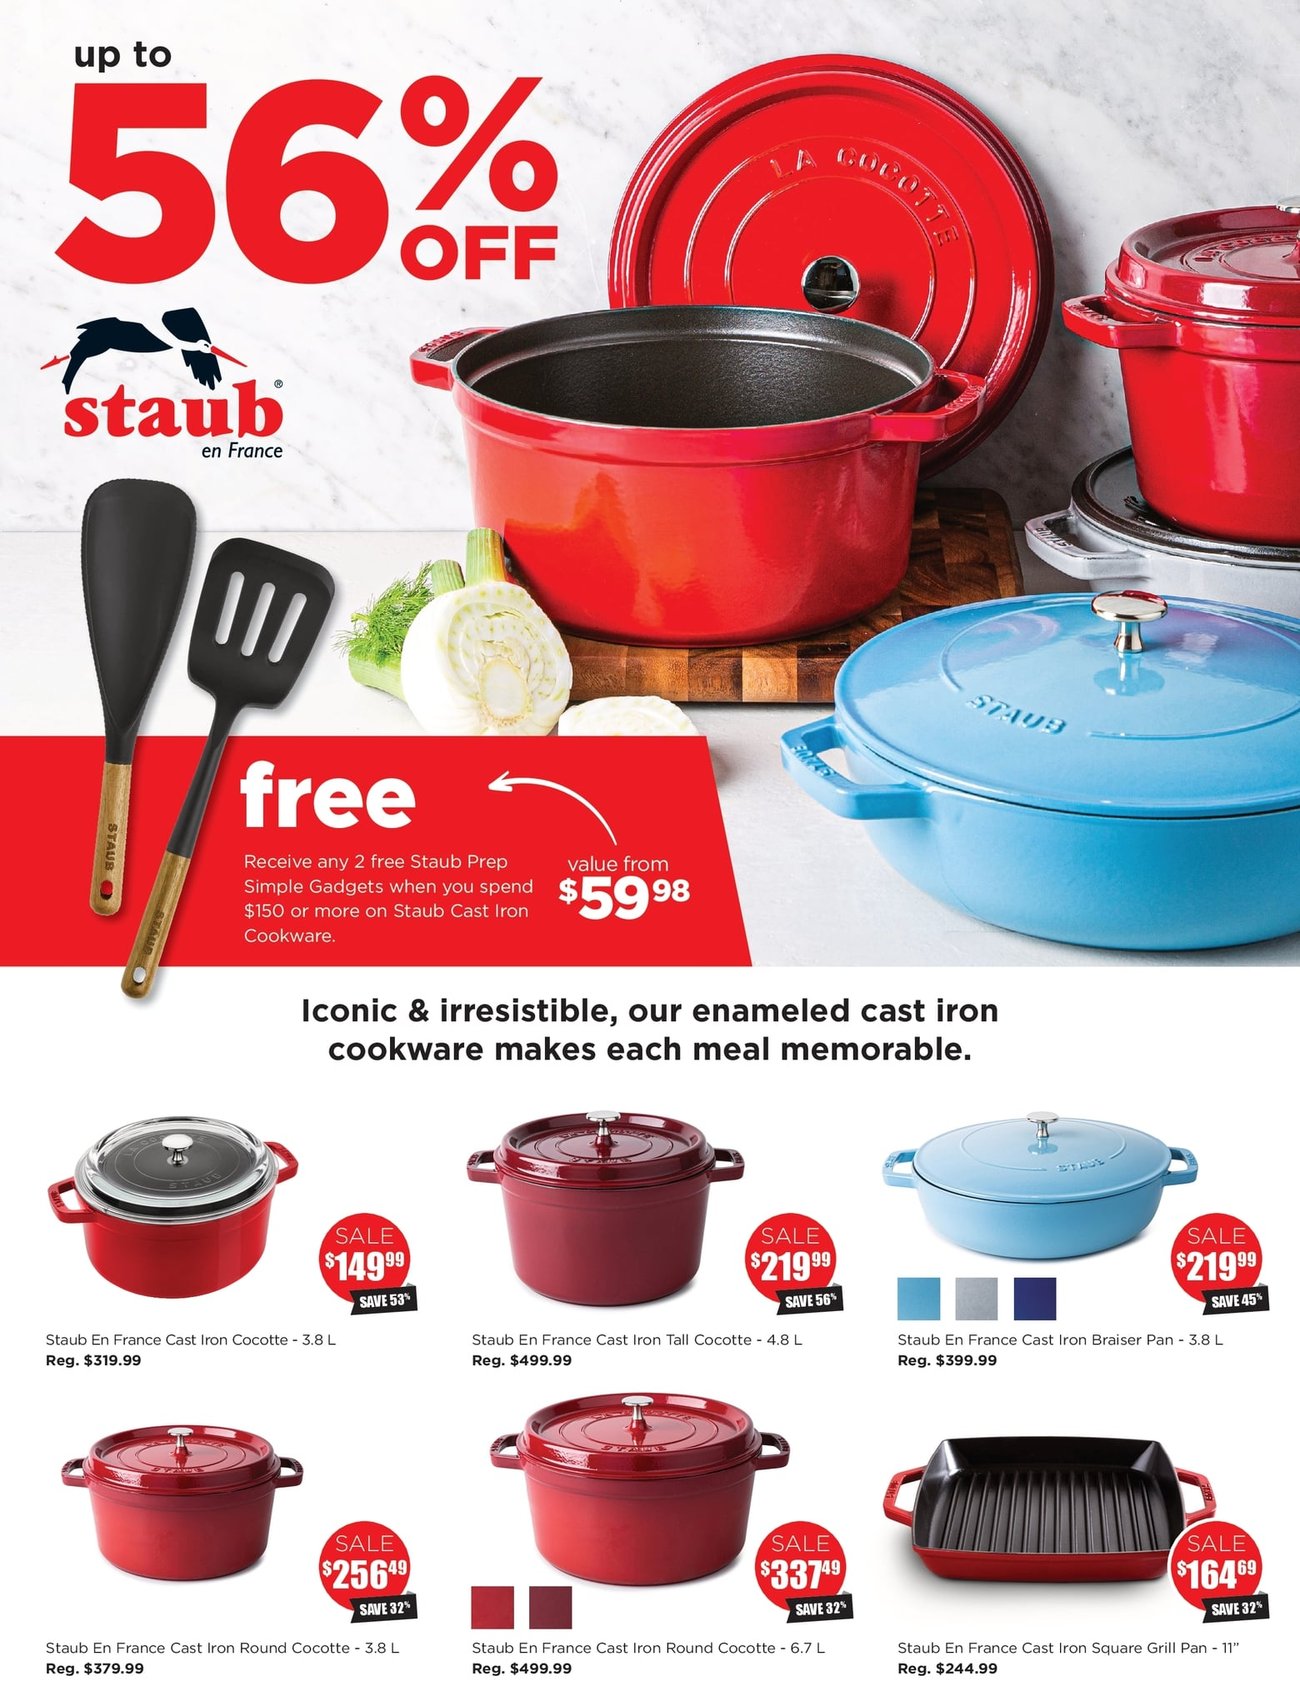 Kitchen Stuff Plus - Everything Cooking Sale - Page 8